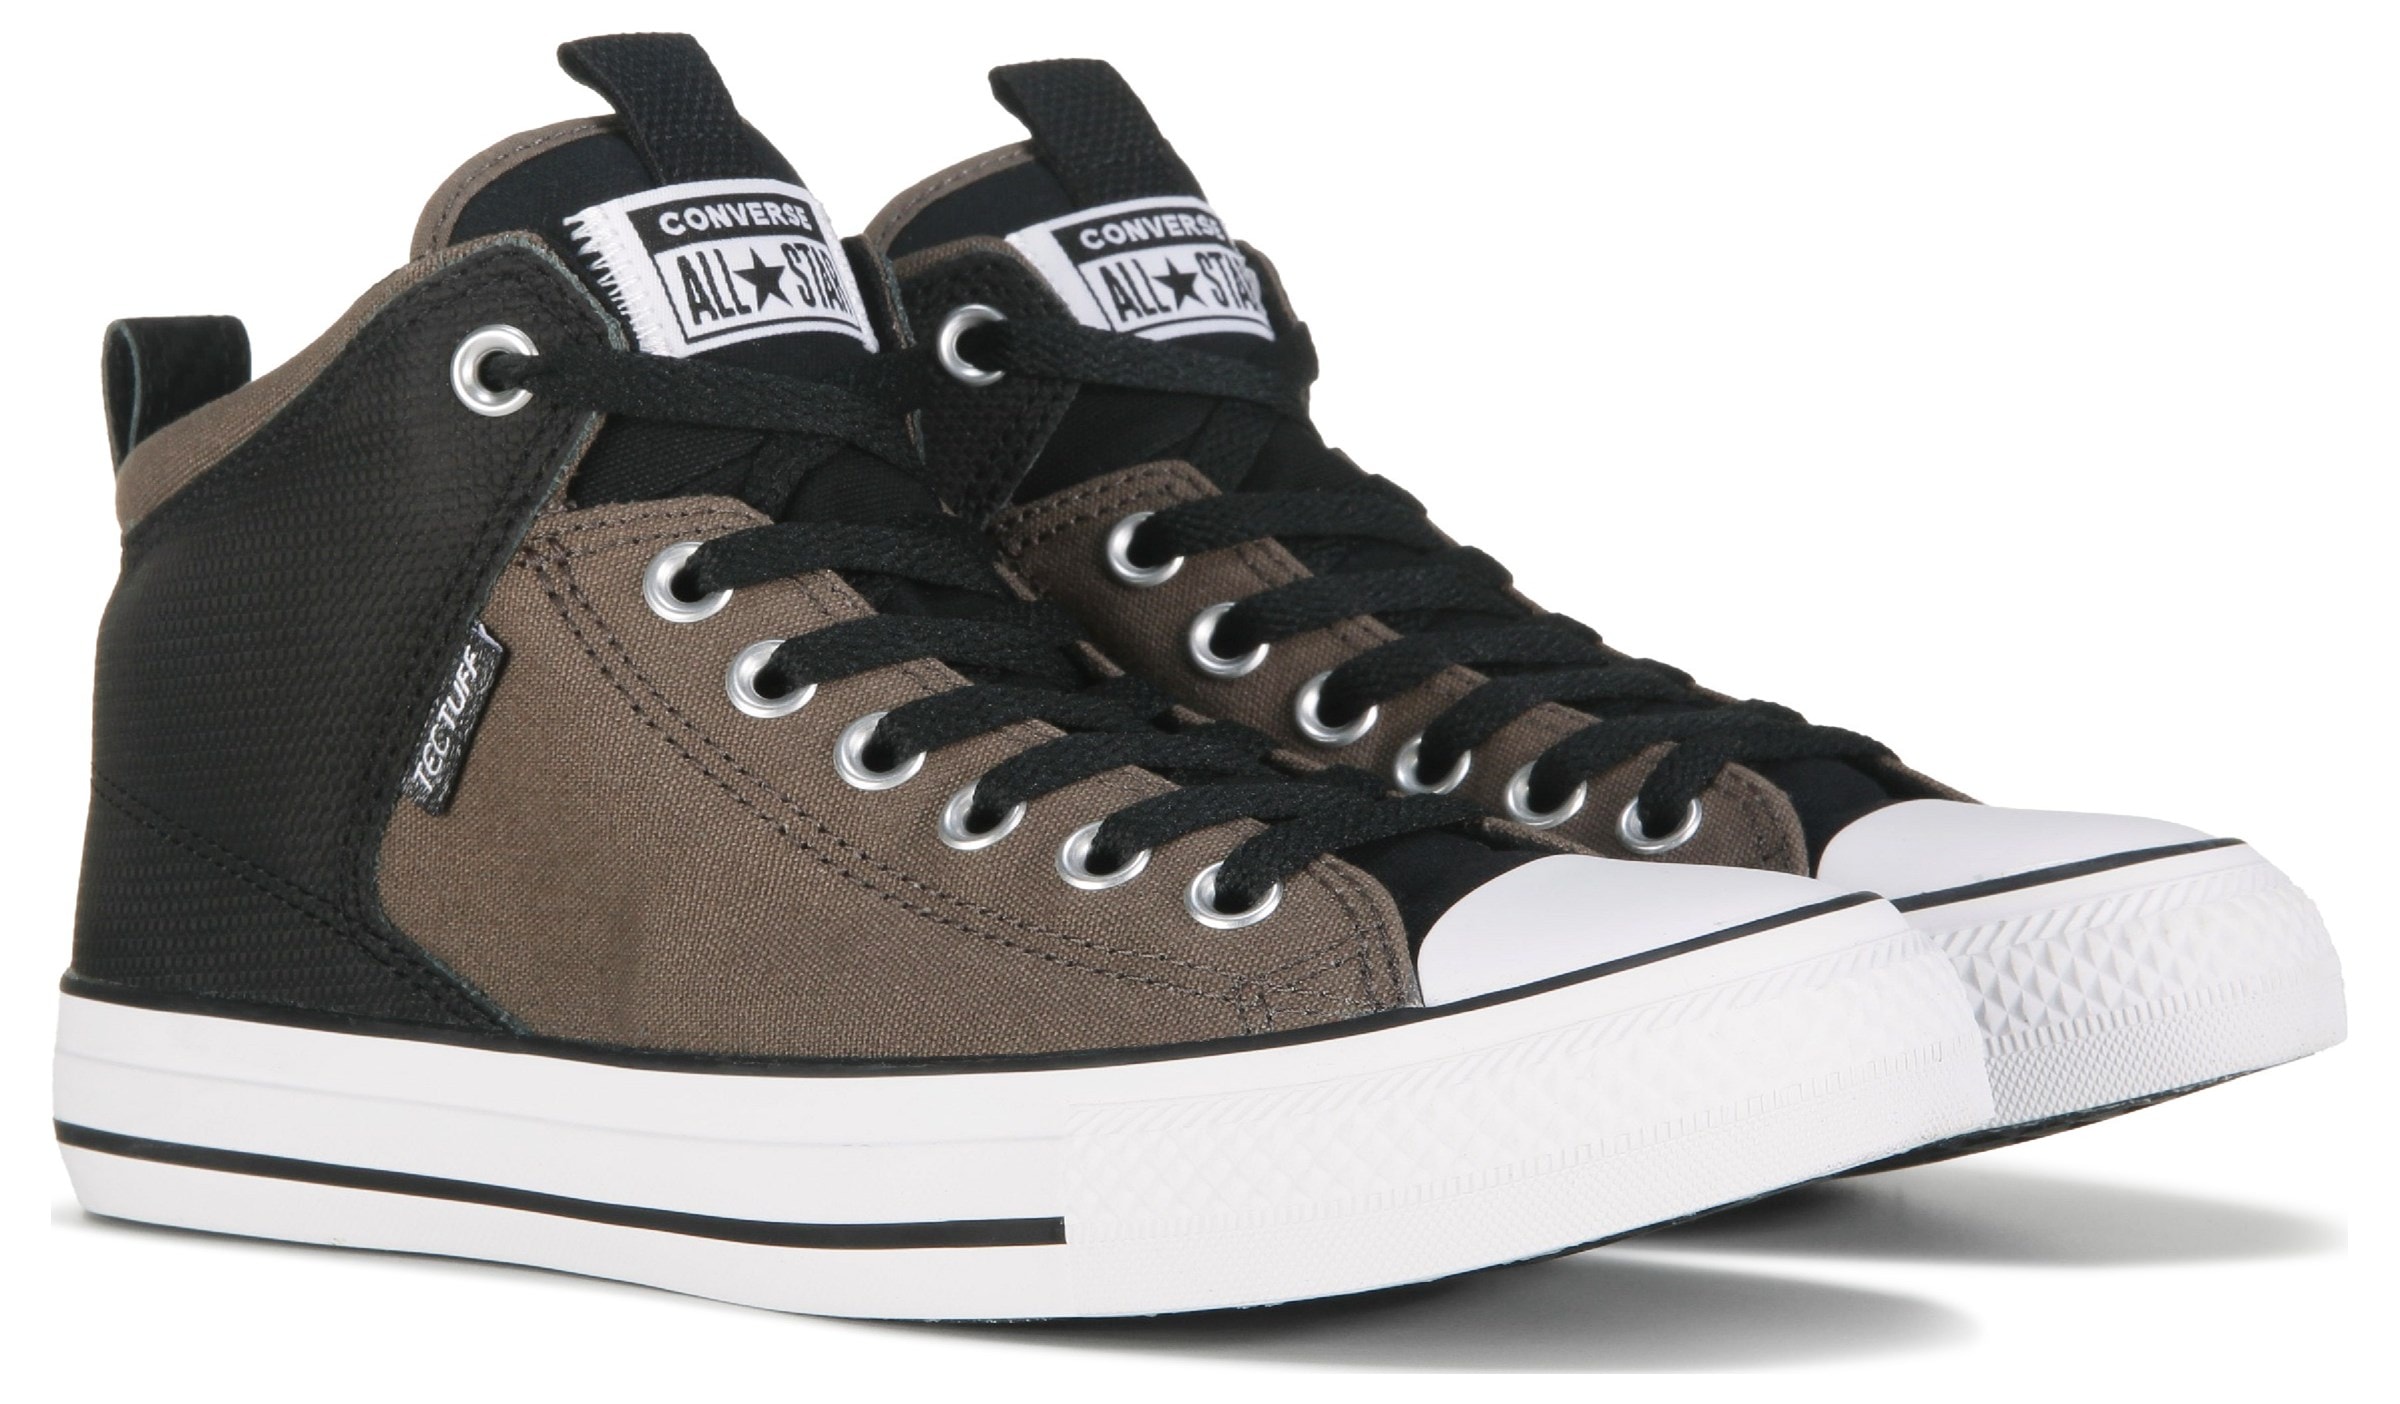 Buy Converse High Top Black White Sneakers 152779C (Mens 12) at